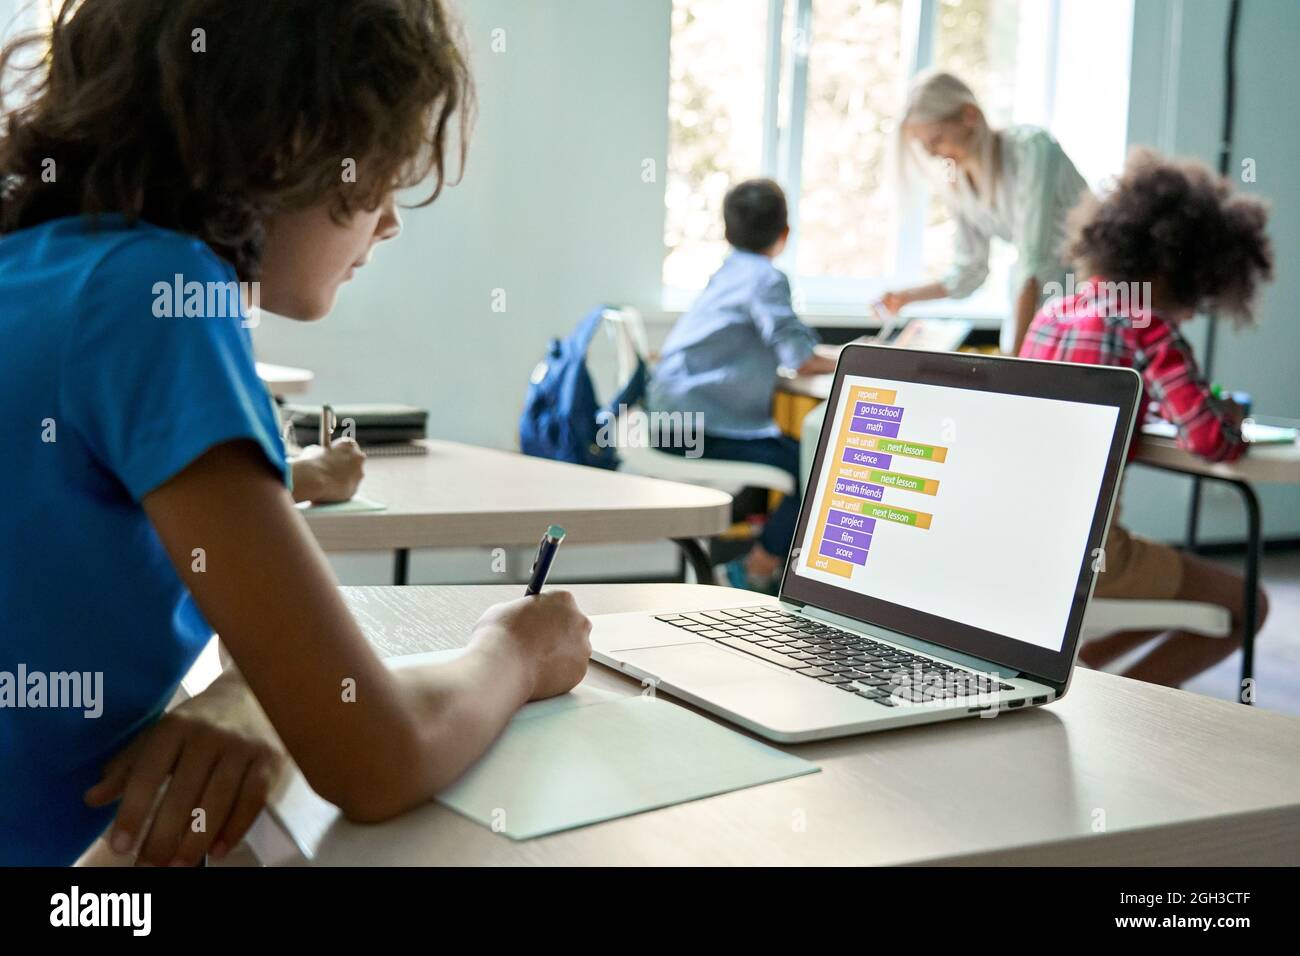 Teen boy school student using laptop learning program during class in classroom. Stock Photo